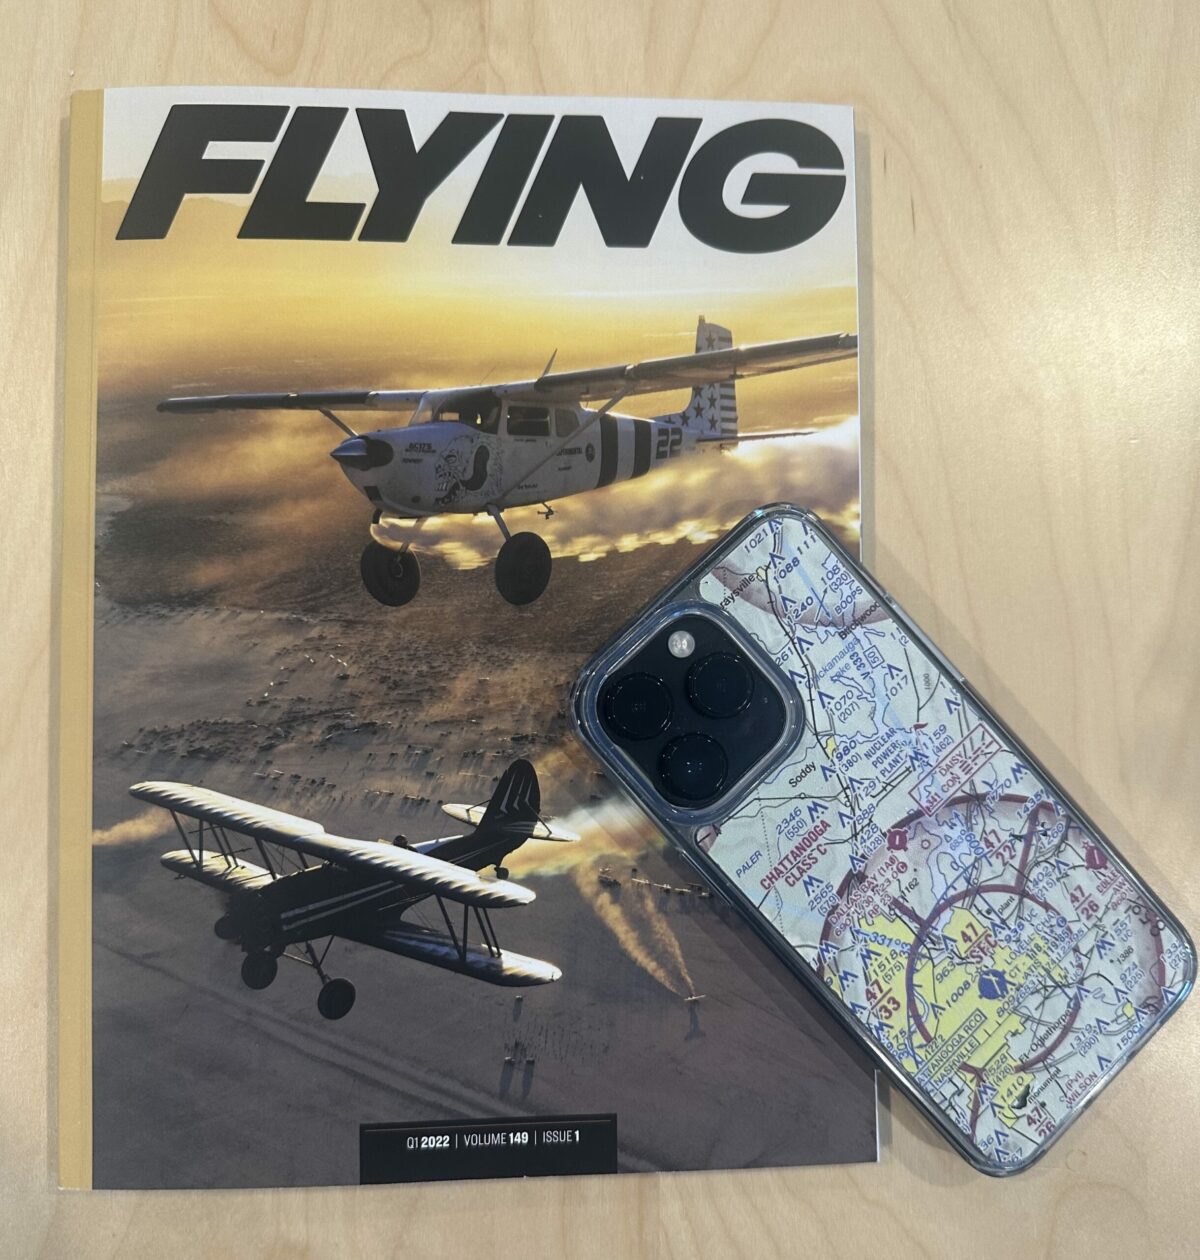 Aeroswag Turns Sectionals into Aviation Mementos